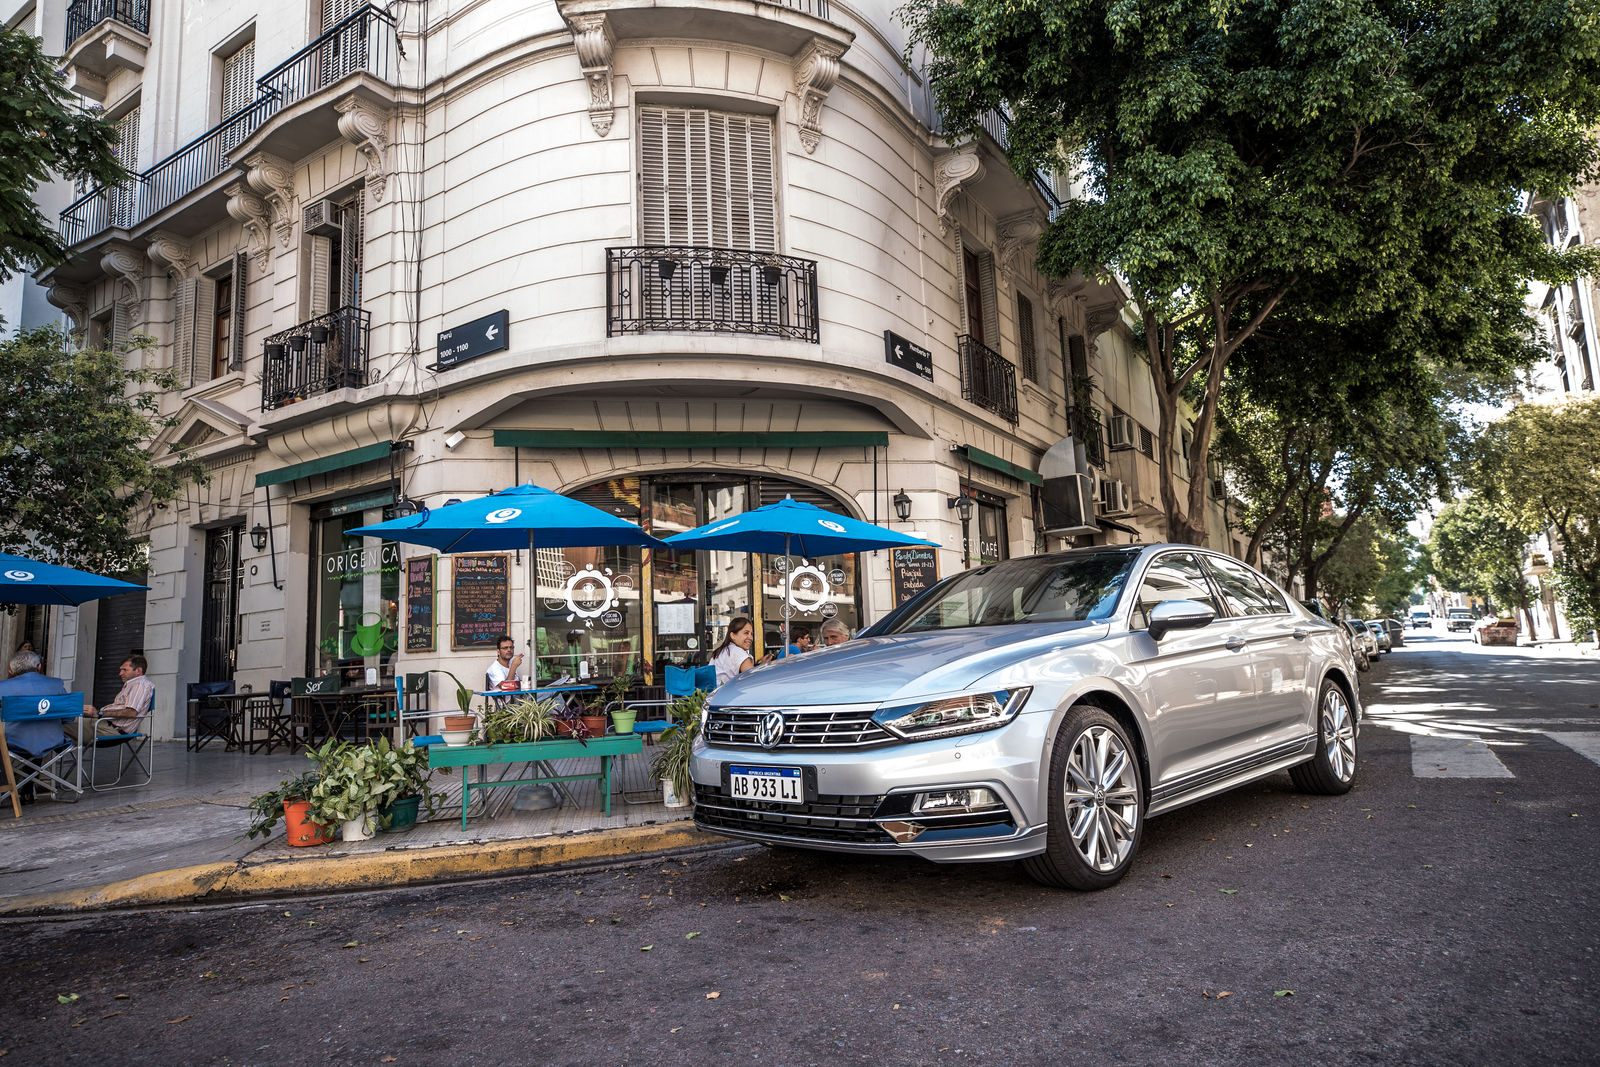 Story: A Passat enraptured by the tango